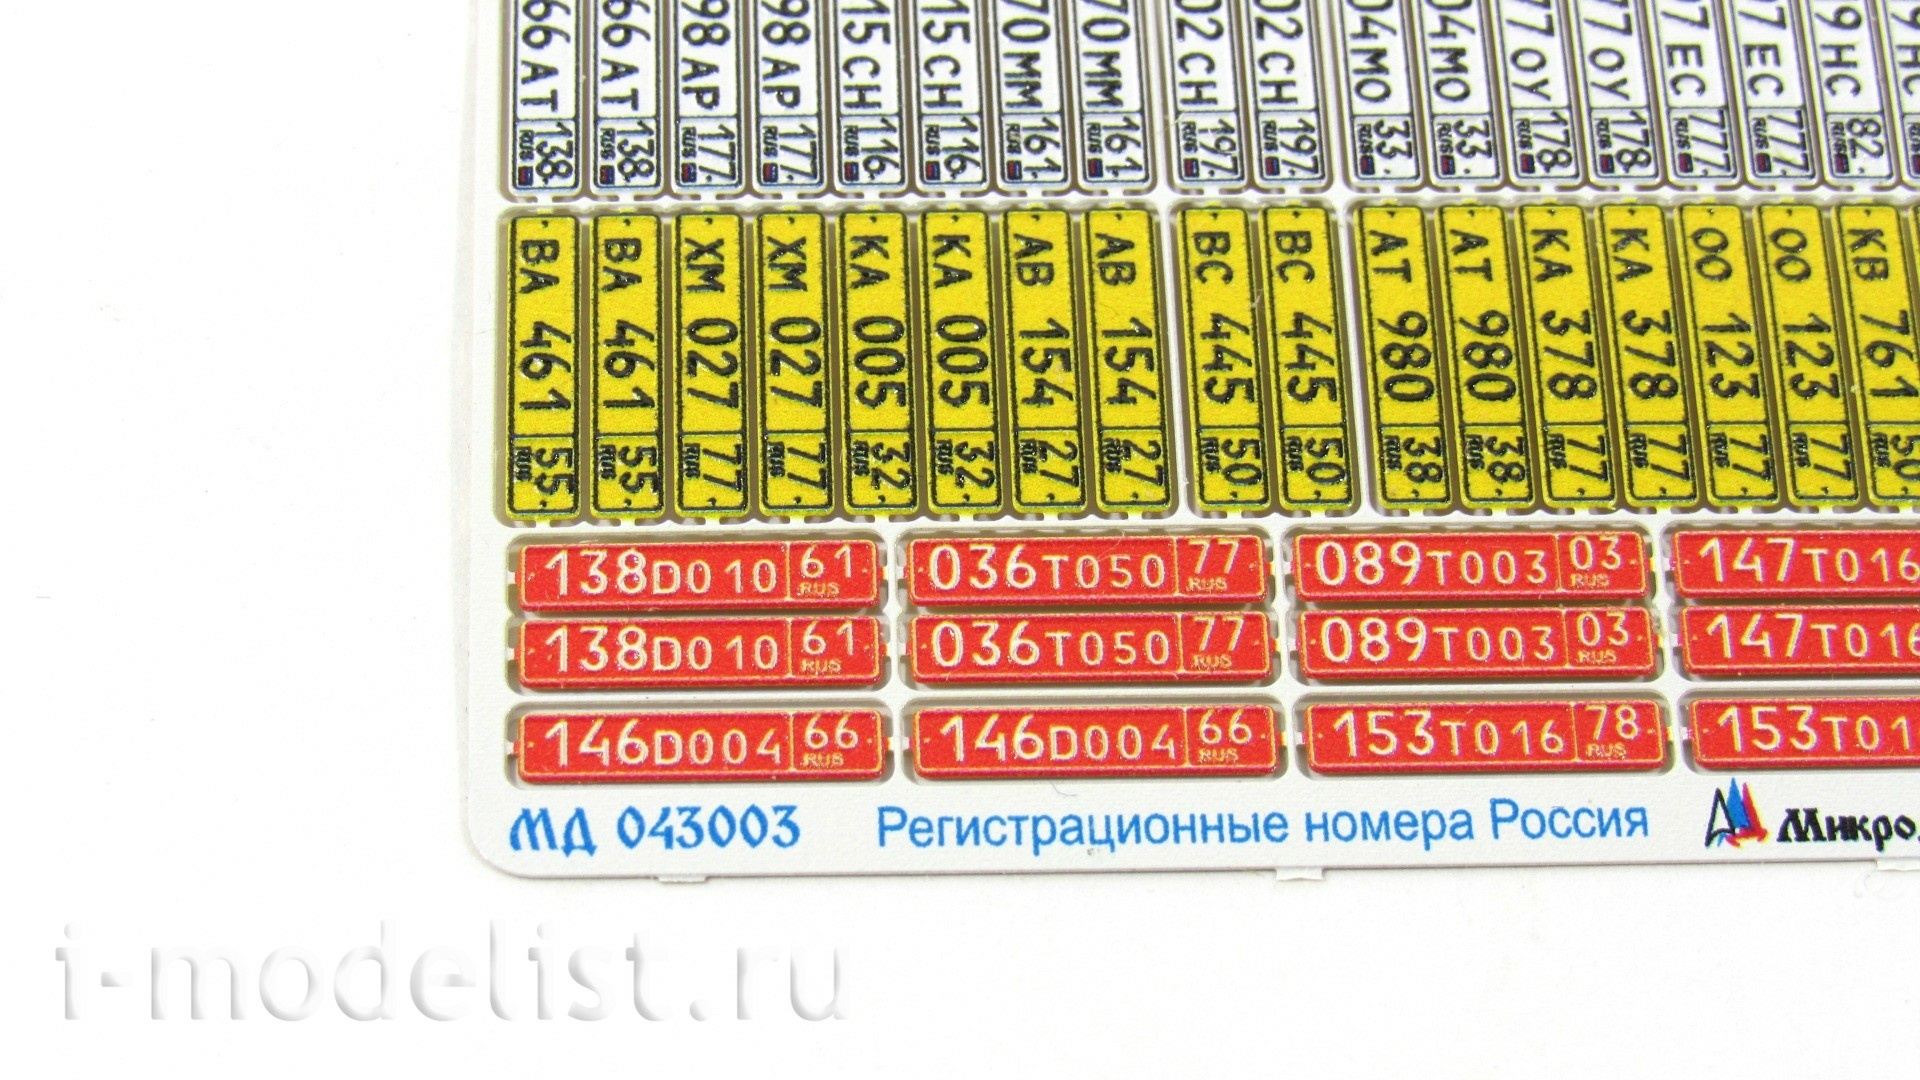 043003 Microdesign 1/43 State numbers of Russia